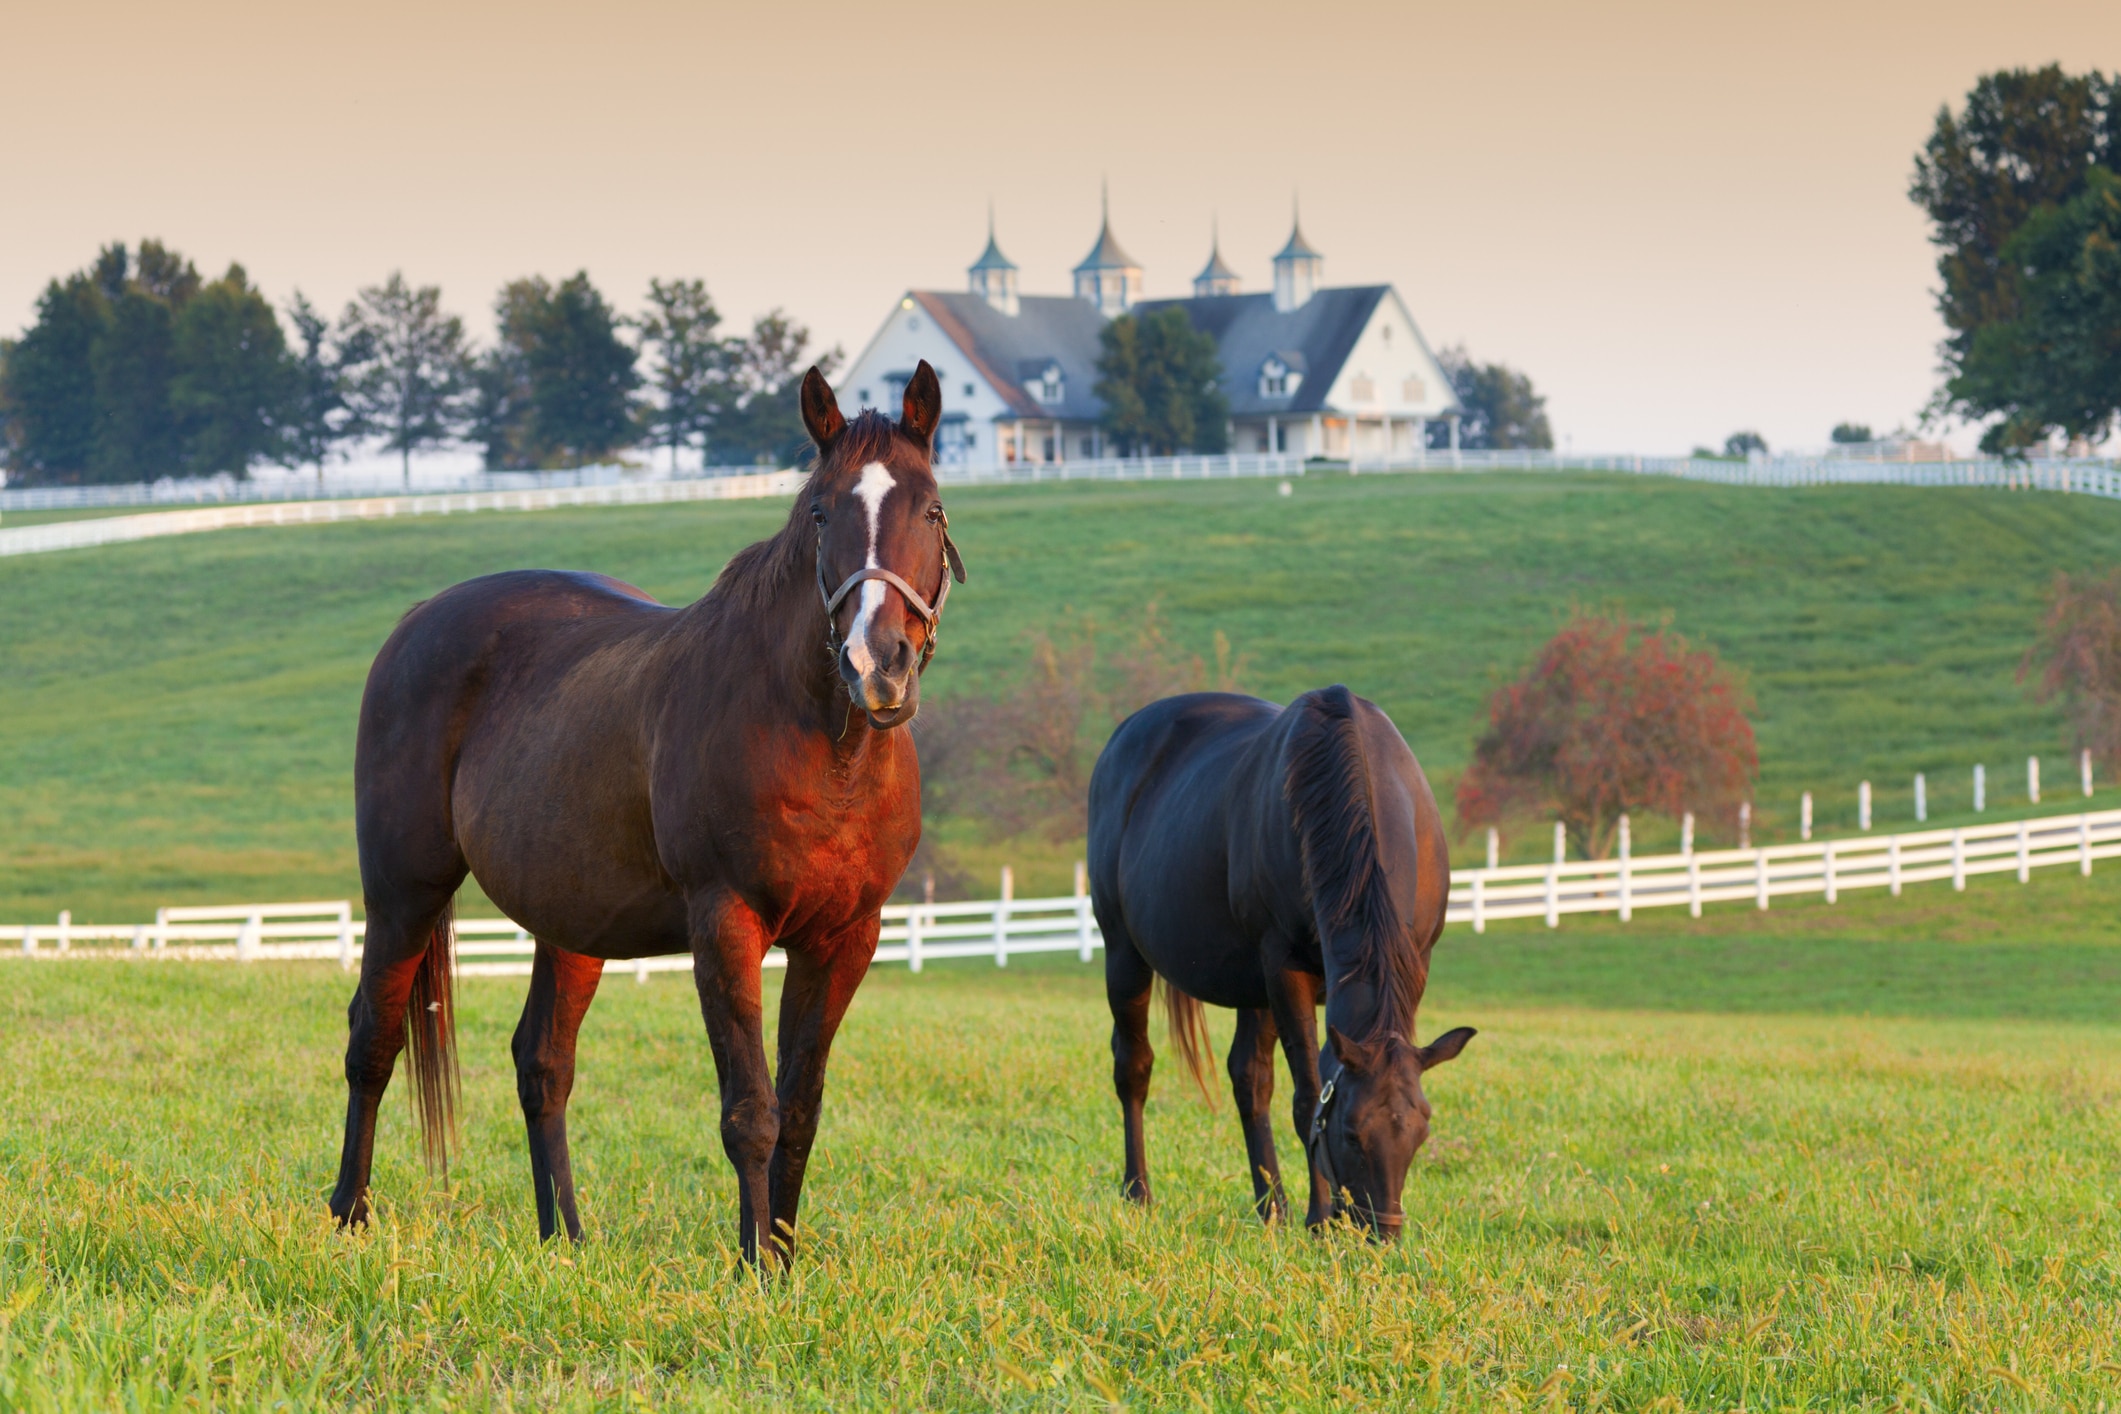 Two horses standing on a grassy field with white fences in background.